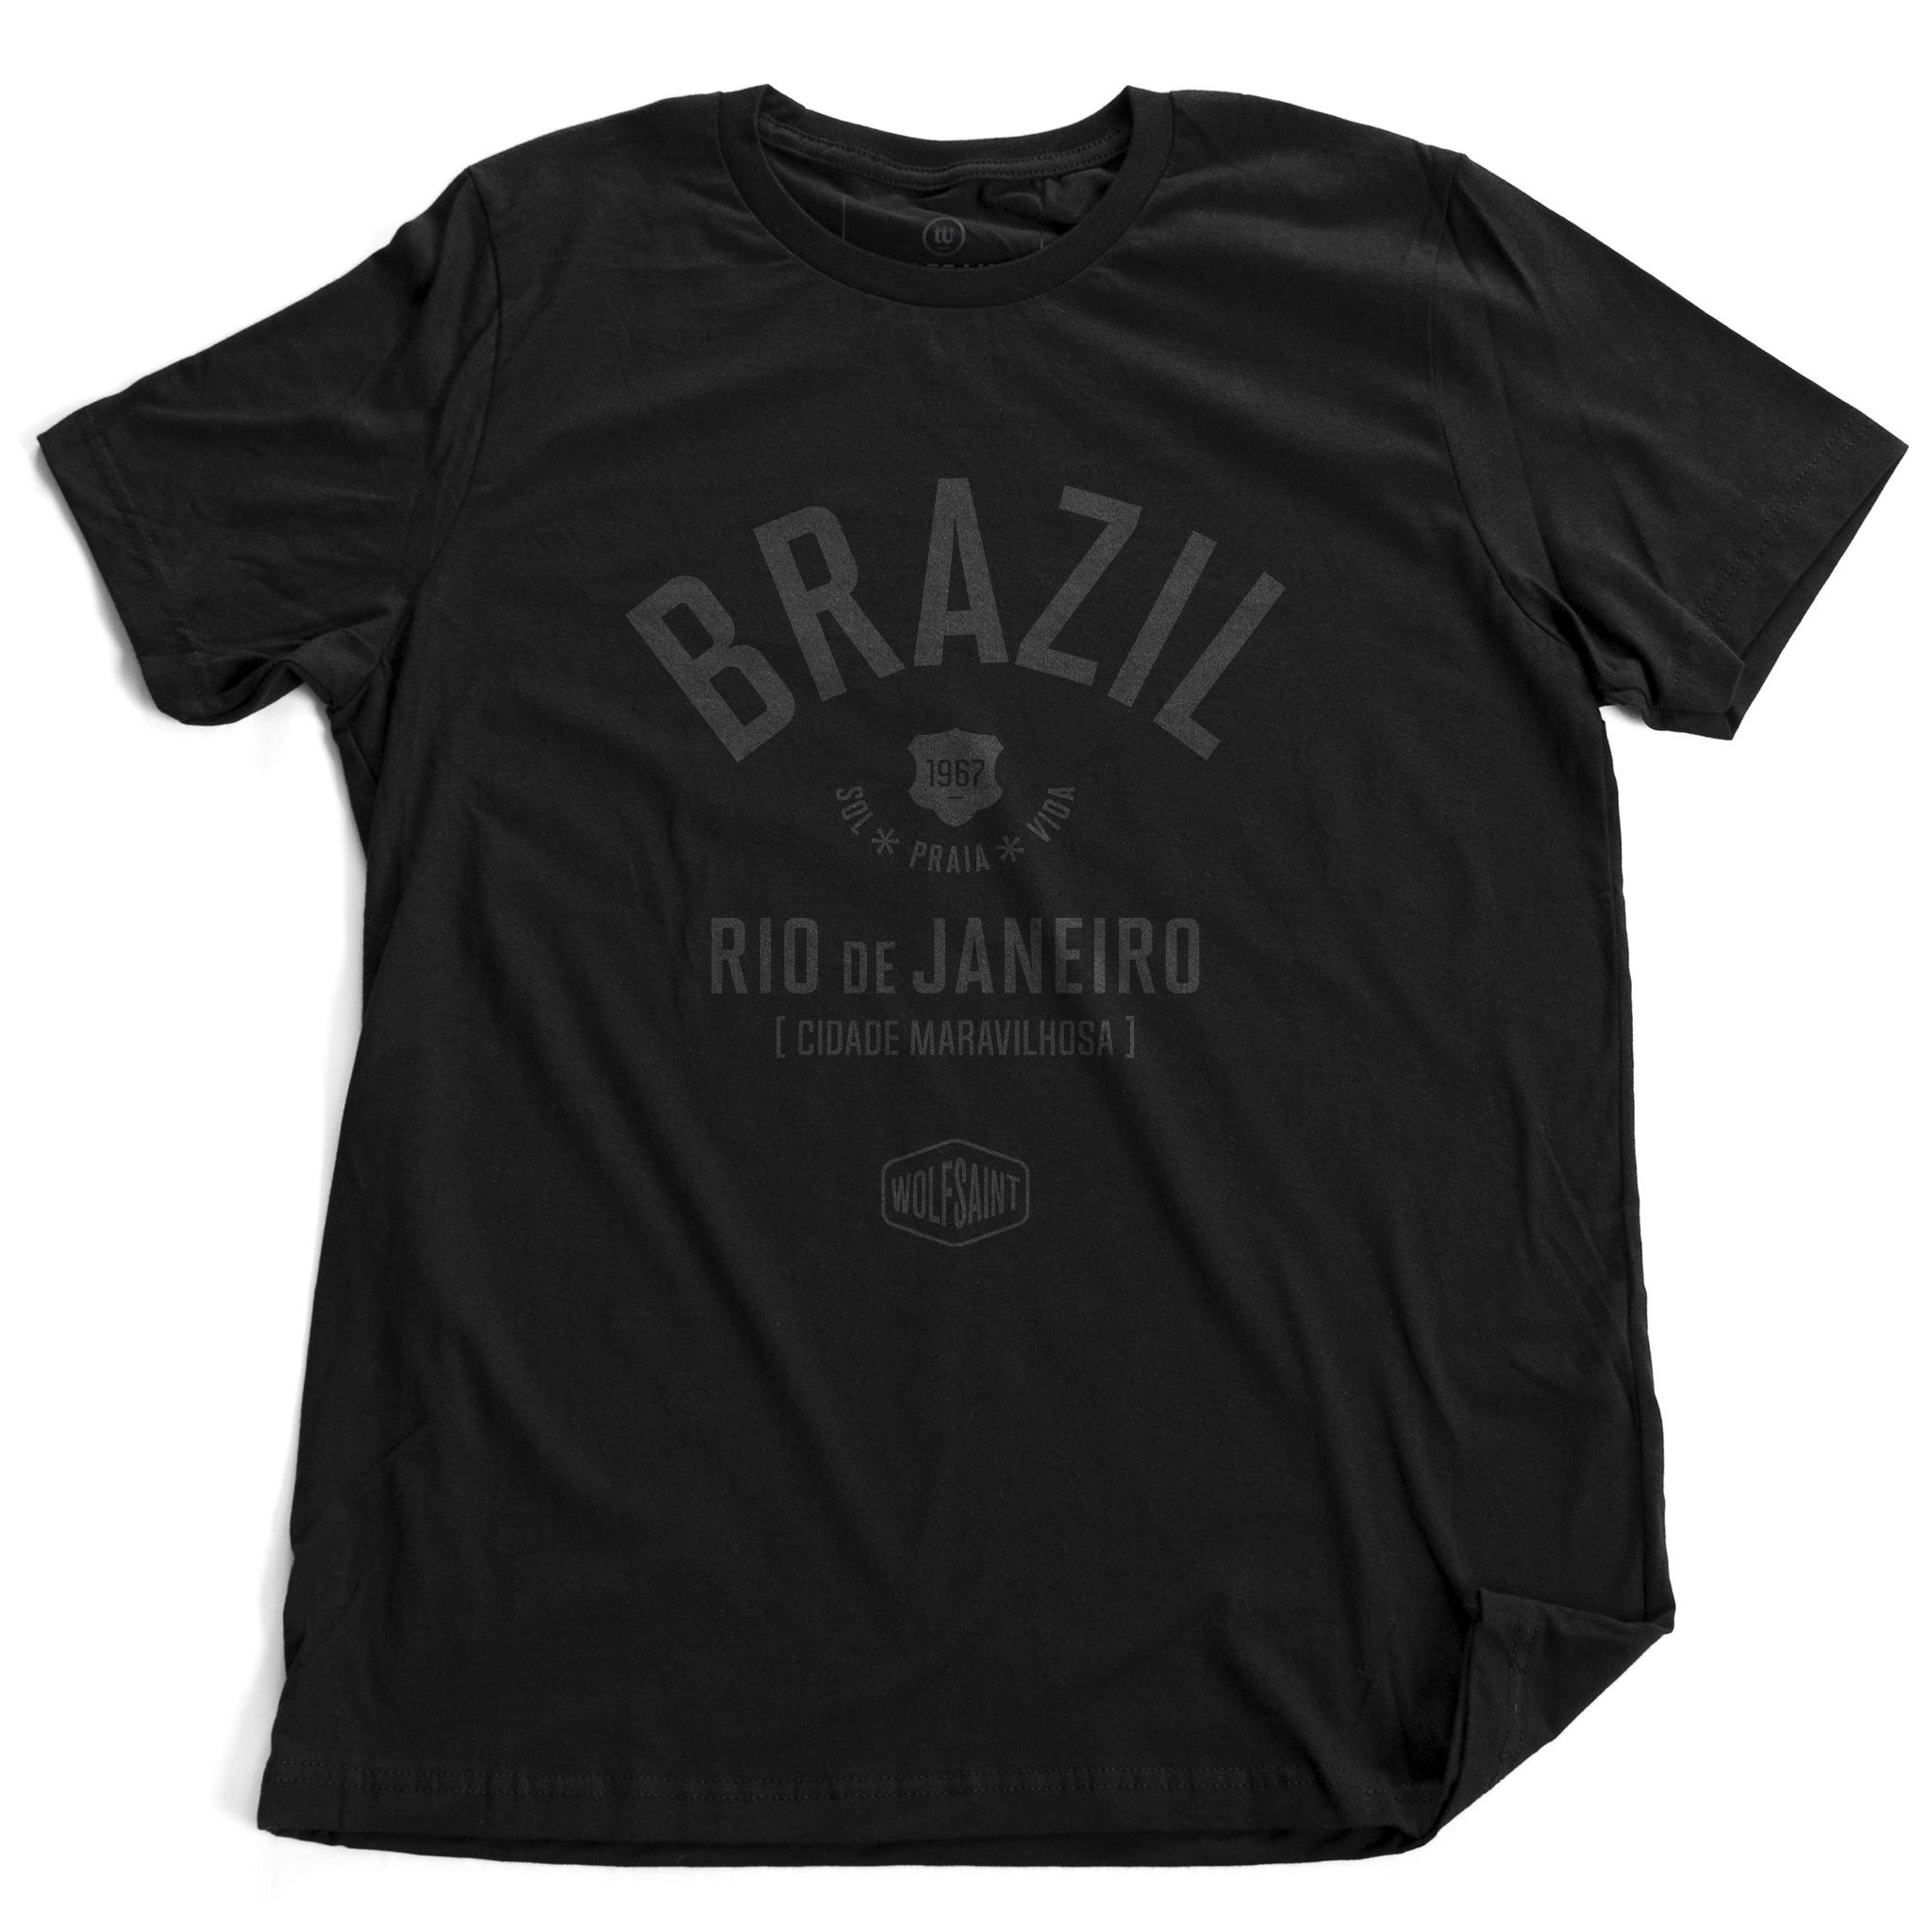 Black retro t-shirt with classic typography and graphic of BRAZIL (Brasil) and Rio de Janeiro, "Cidade Maravilhosa" (The Marvelous City) by brand Wolfsaint, with the date 1967, and sun, beach, life in Portuguese (Sol Praia Vida). From wolfsaint.net